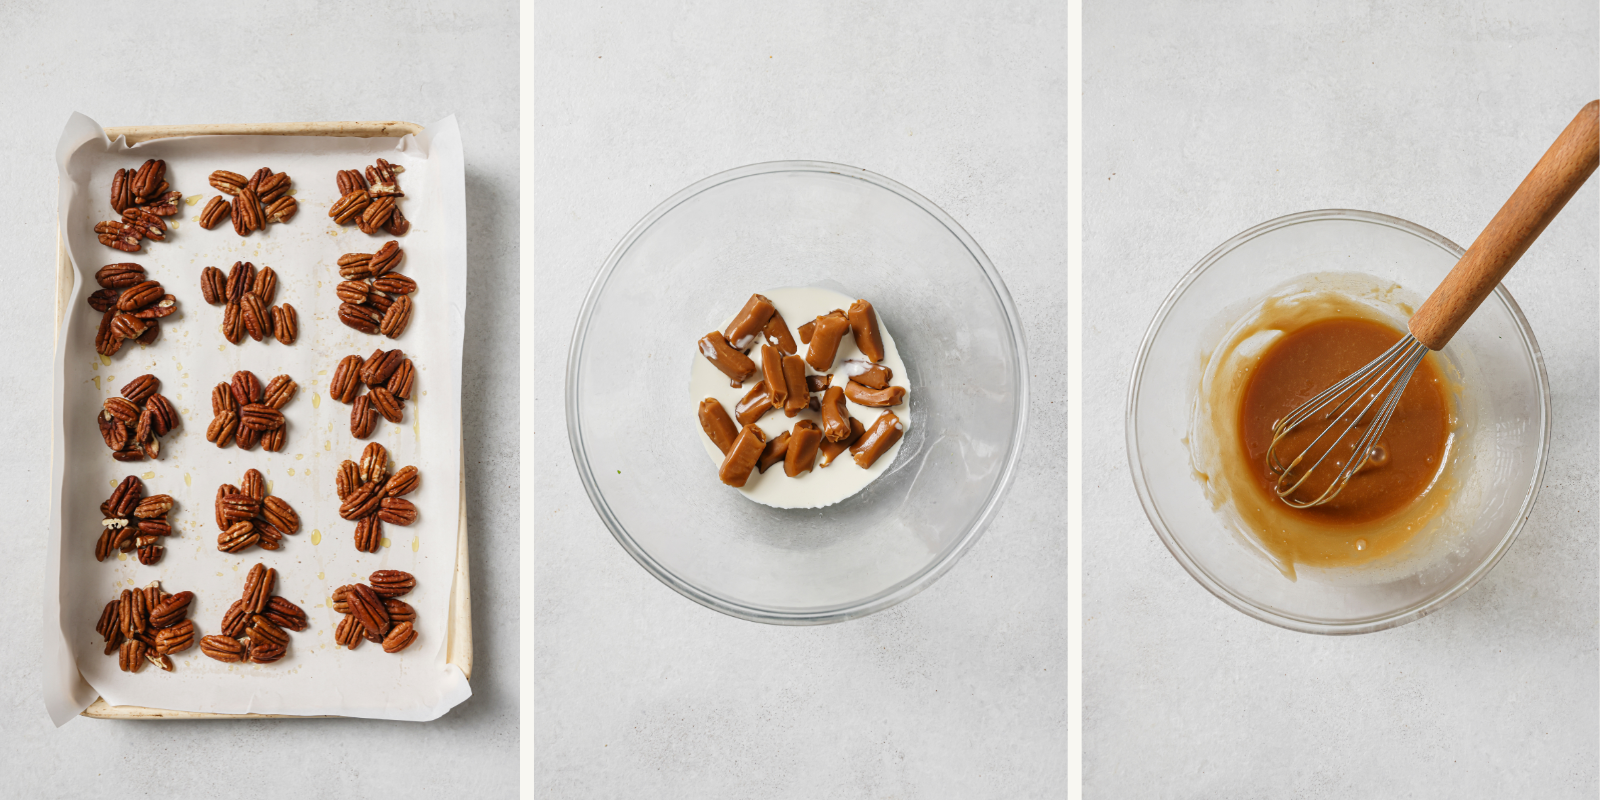 Left: pecan clusters on a baking sheet. Center: caramel candy and cream. Right: melted caramel sauce.